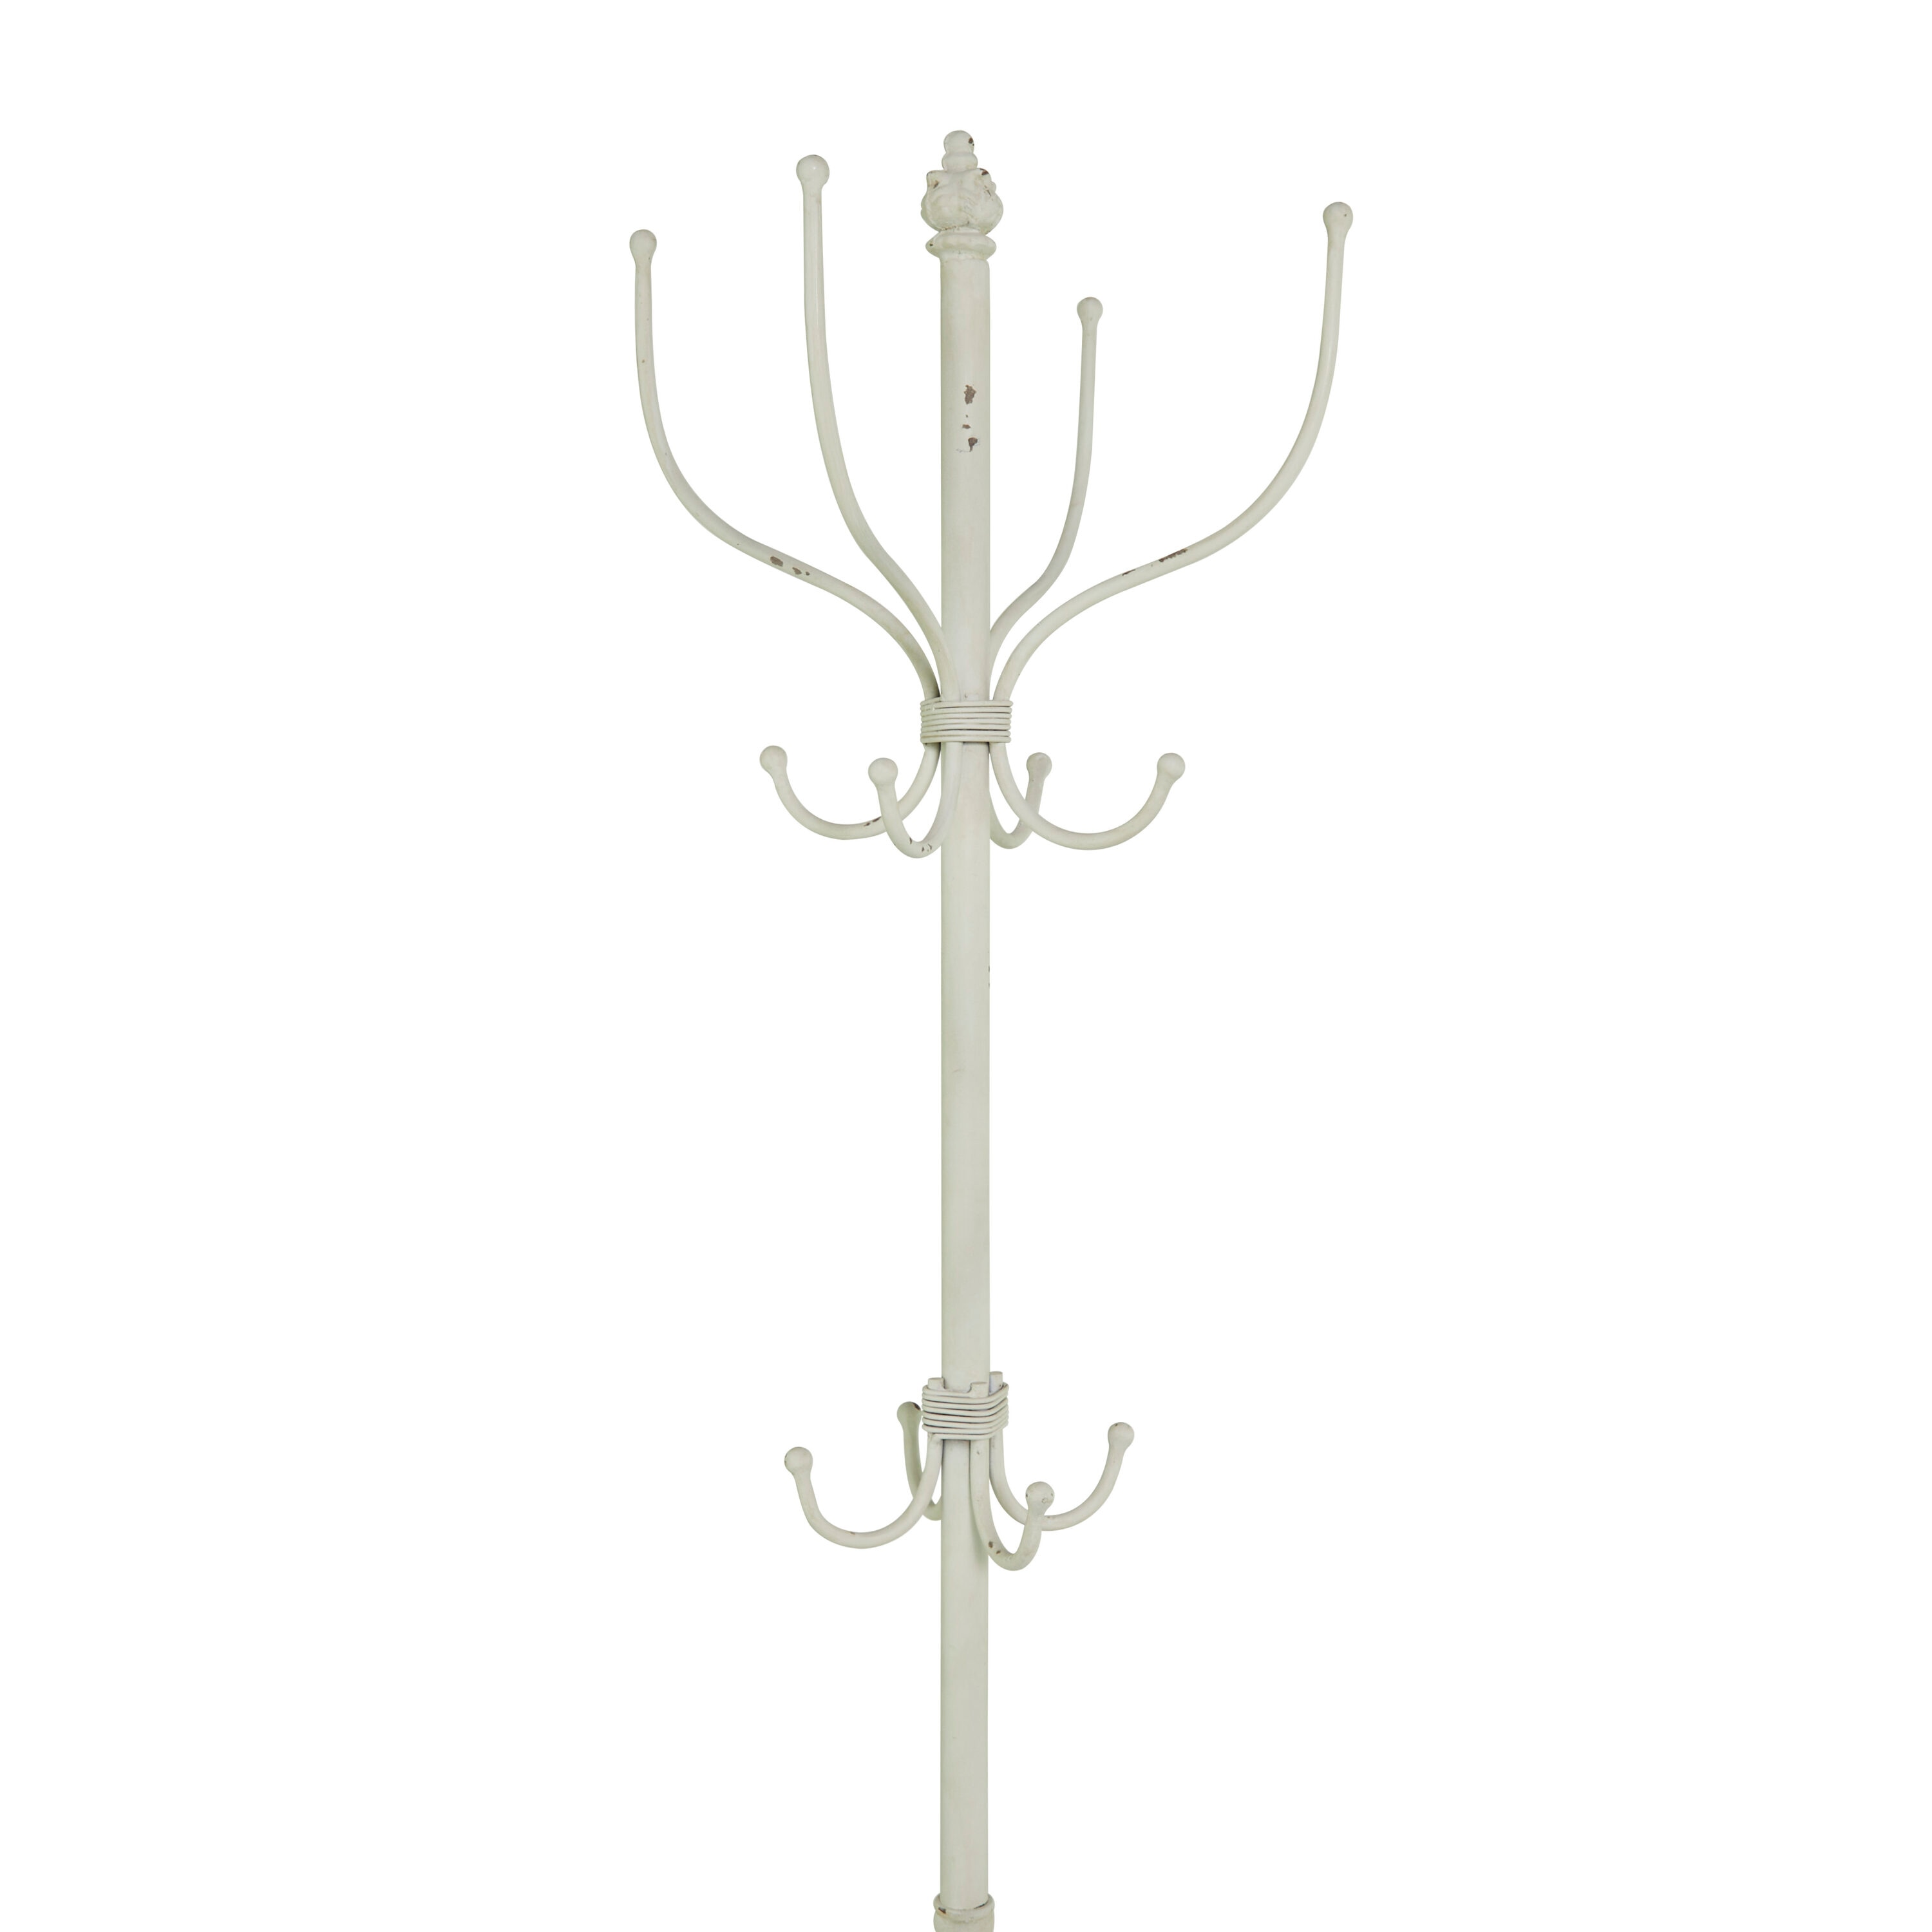 Distressed White with Umbrella Stand 10-Hook Coat Rack